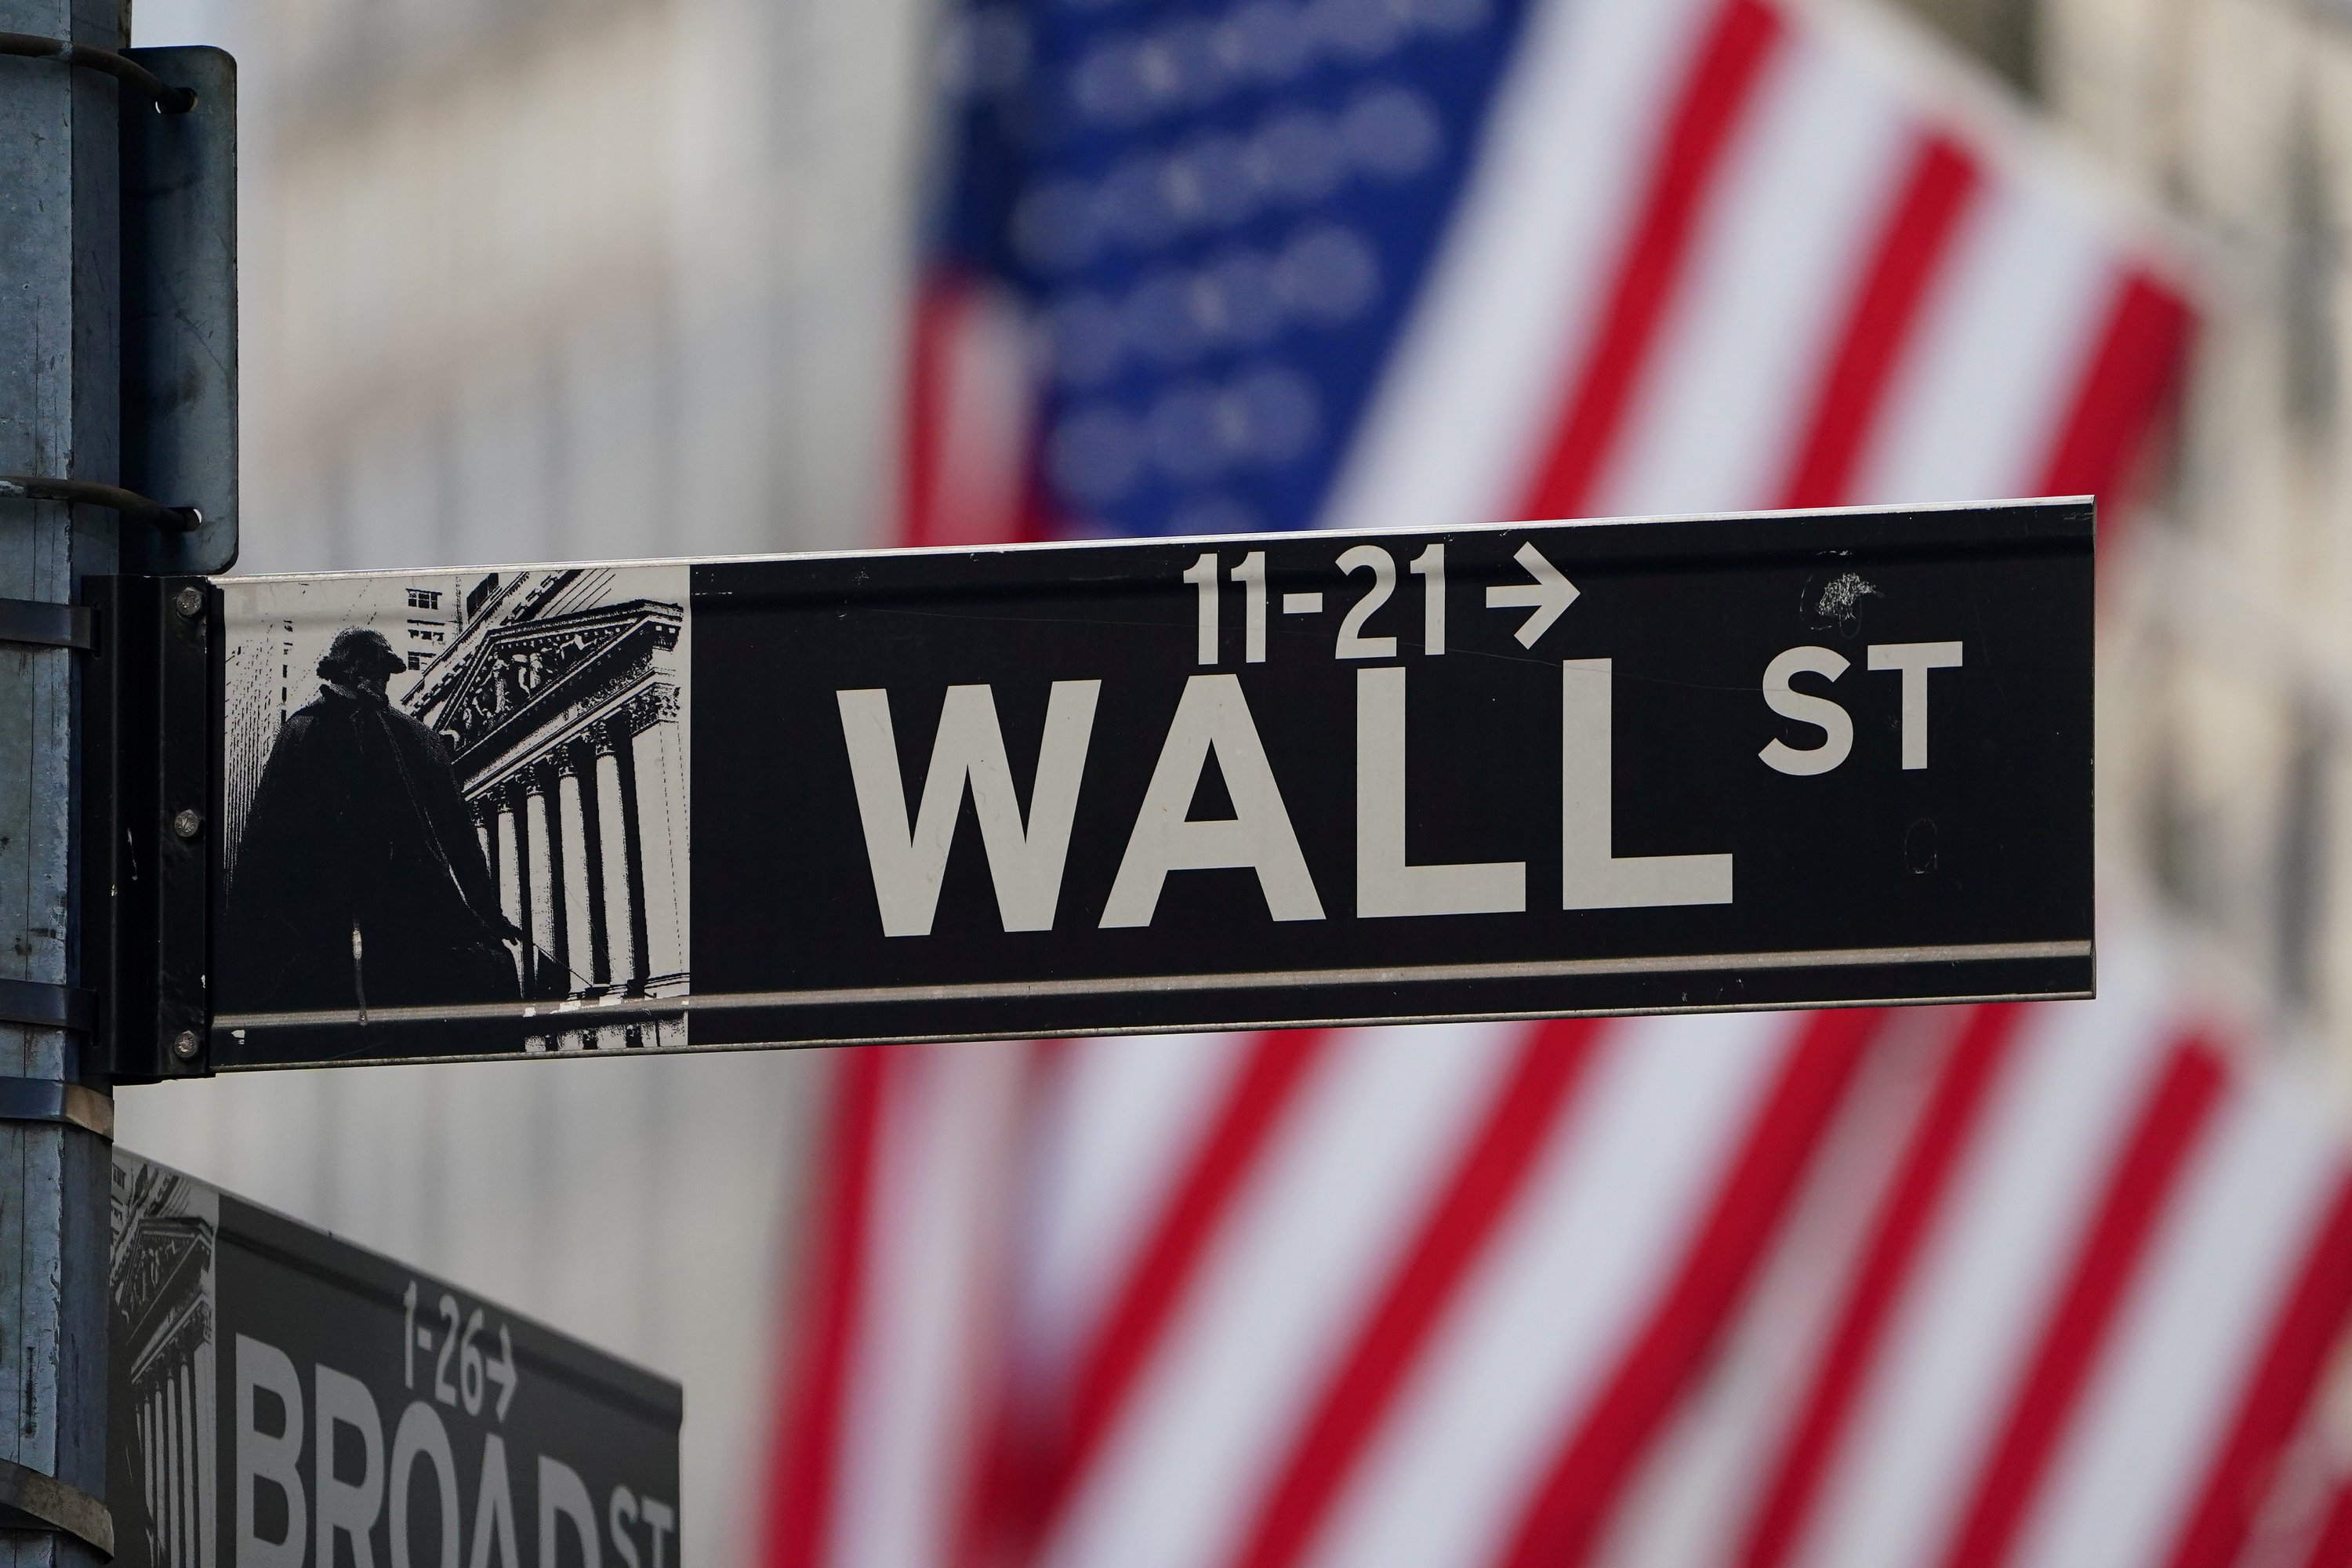 The Wall Street sign is pictured at the New York Stock Exchange (NYSE) in the Manhattan borough of New York City, U.S., March 9, 2020. (Reuters Photo)